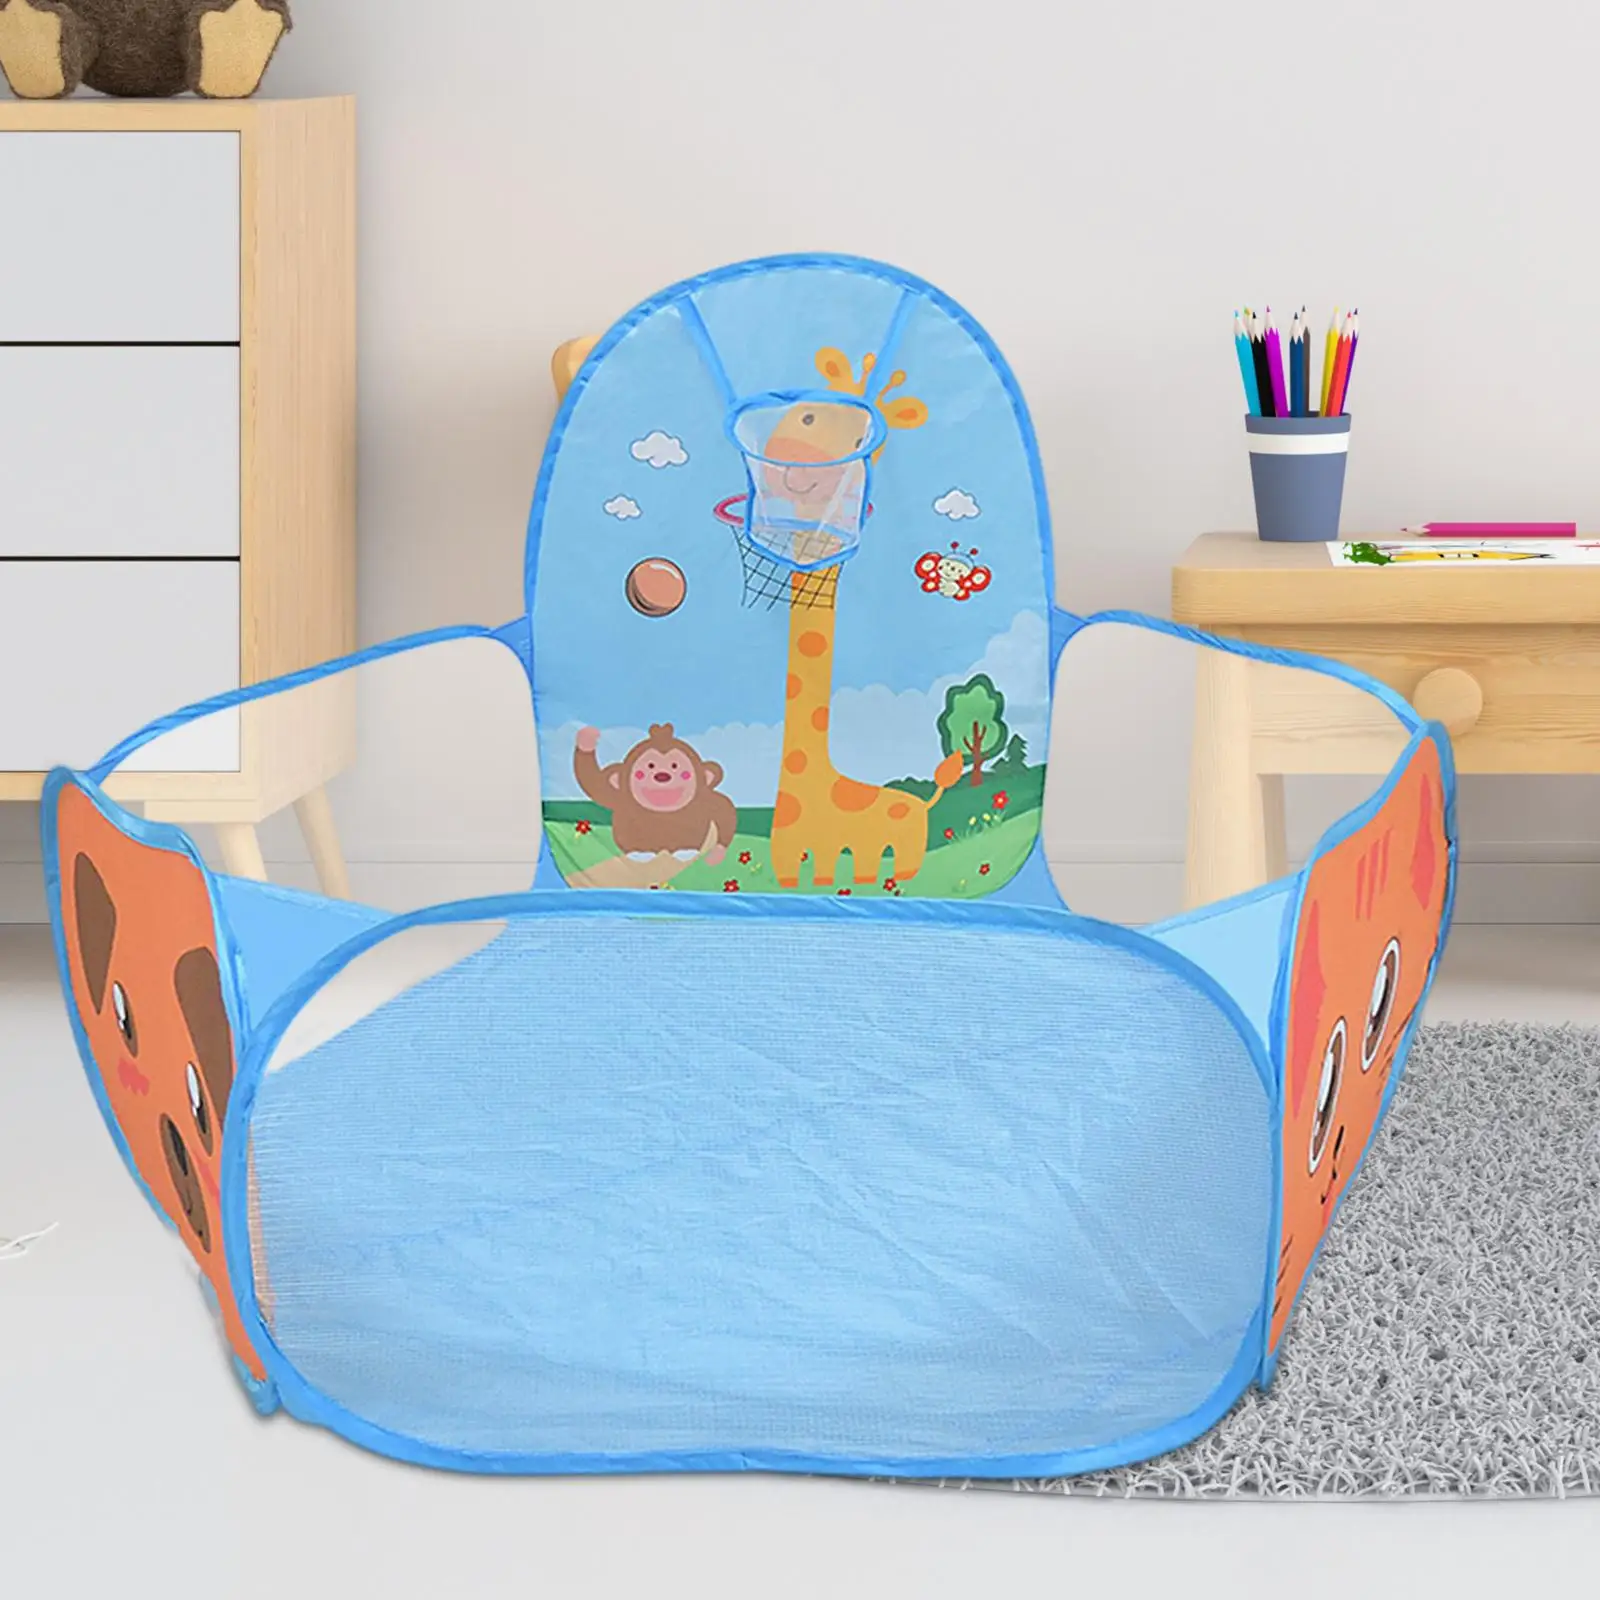 Kids Play Tent Indoor Child Room Decor Toddles Tent Play House Easy Assemble Collapsible Tent Toys for Kids Girls Children Boys